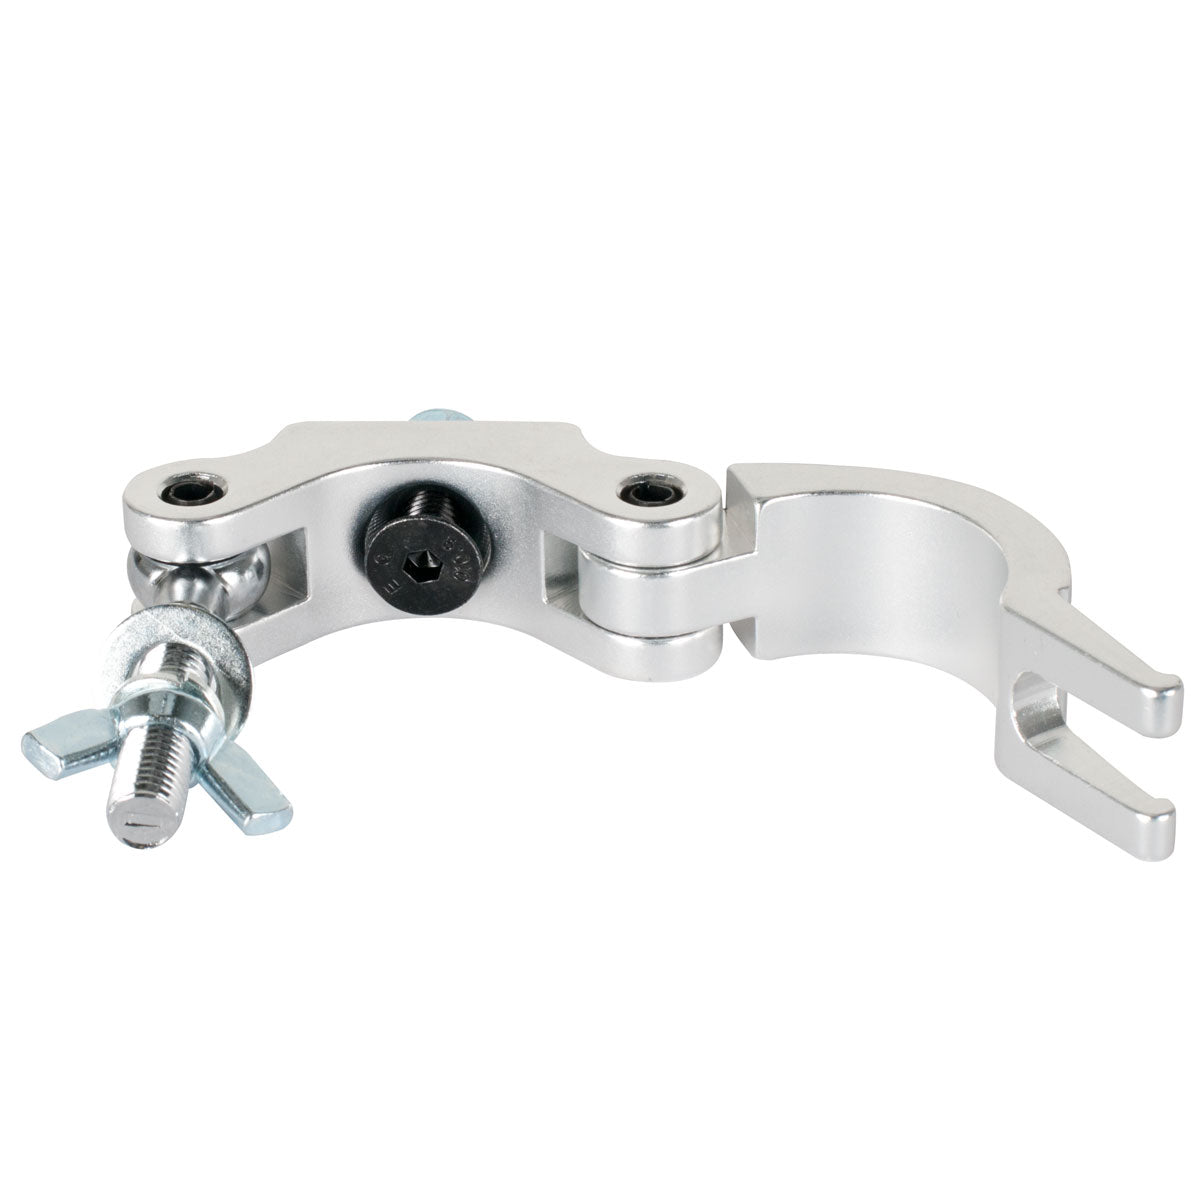 Elation Narrow Clamp - Aluminum Pro Clamp with 2-inch Wrap-around, open